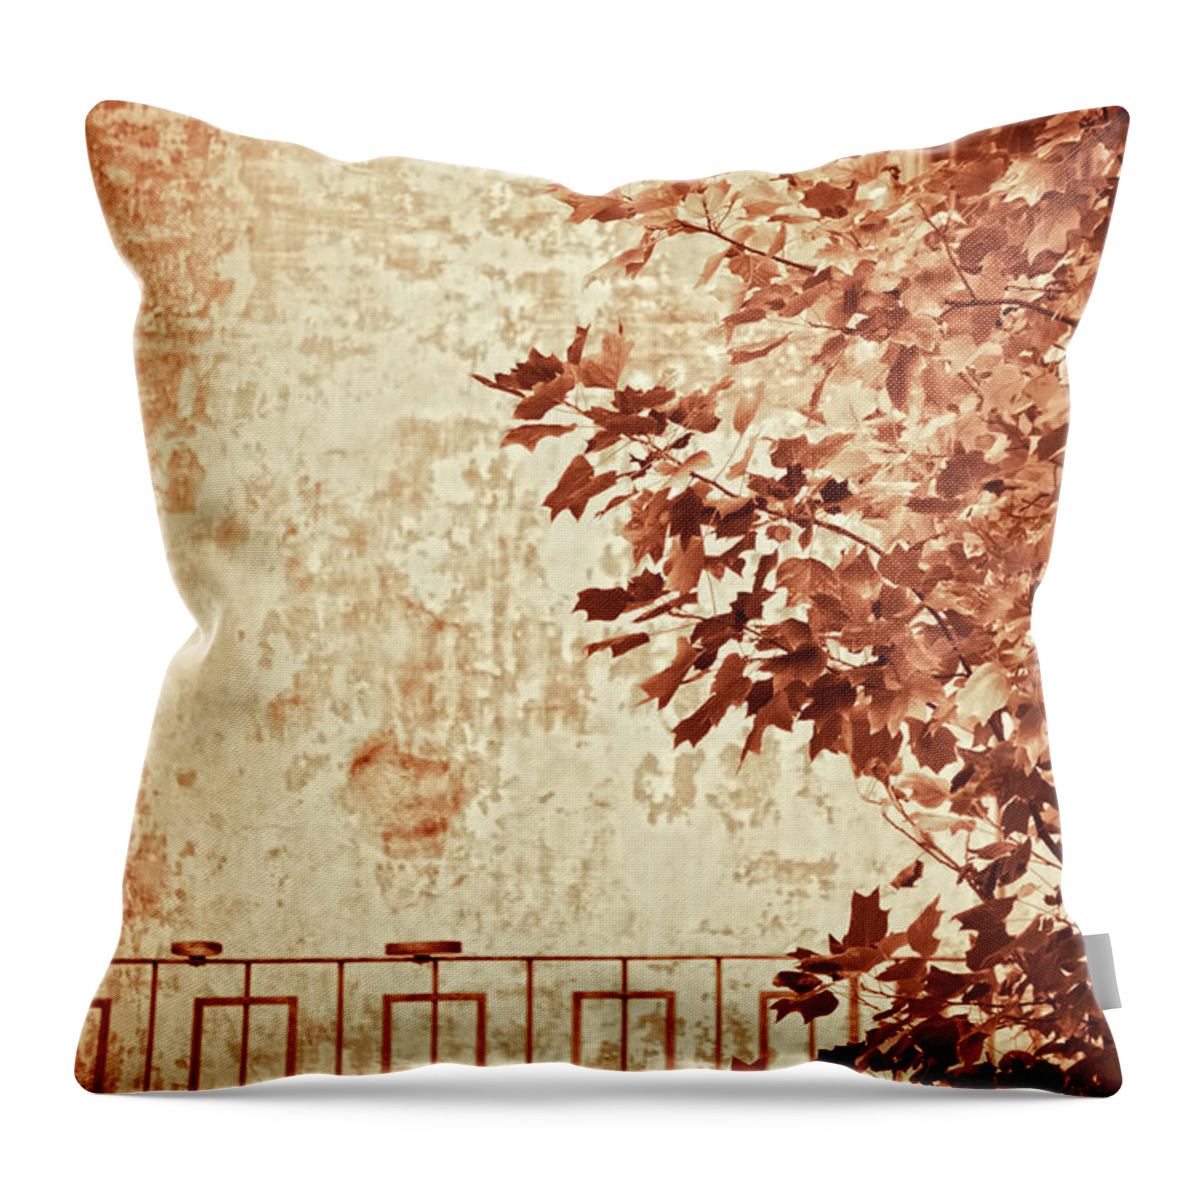 Sepia Throw Pillow featuring the photograph Fall II by Silvia Ganora